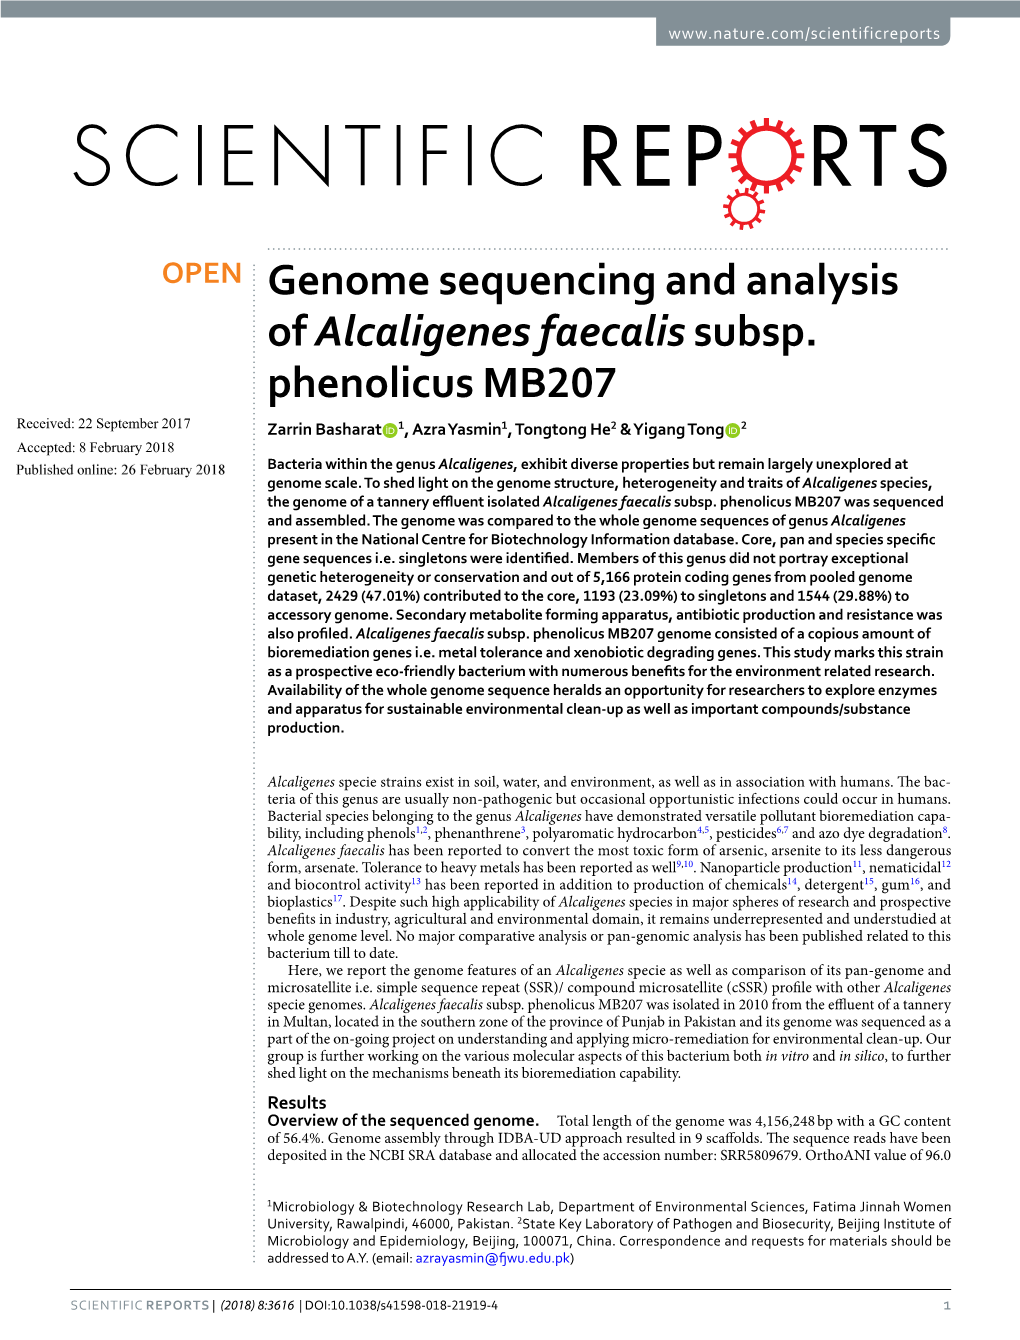 Genome Sequencing and Analysis of Alcaligenes Faecalis Subsp